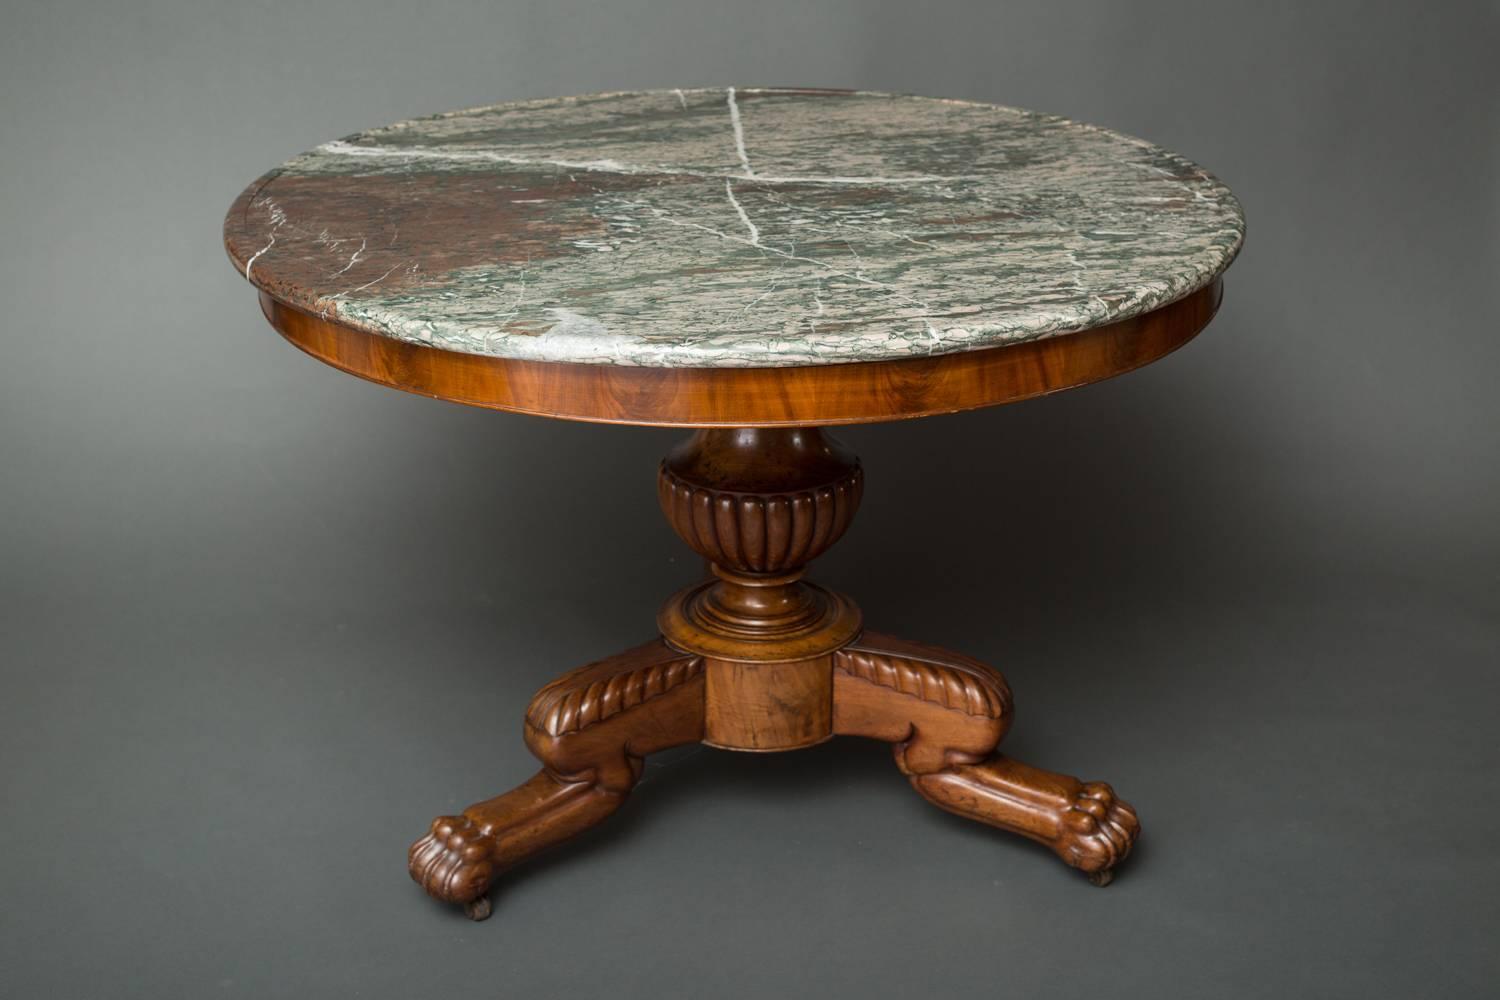 With green veined marble top and paw feet with casters.
Provenance: Gene Tyson, NY.